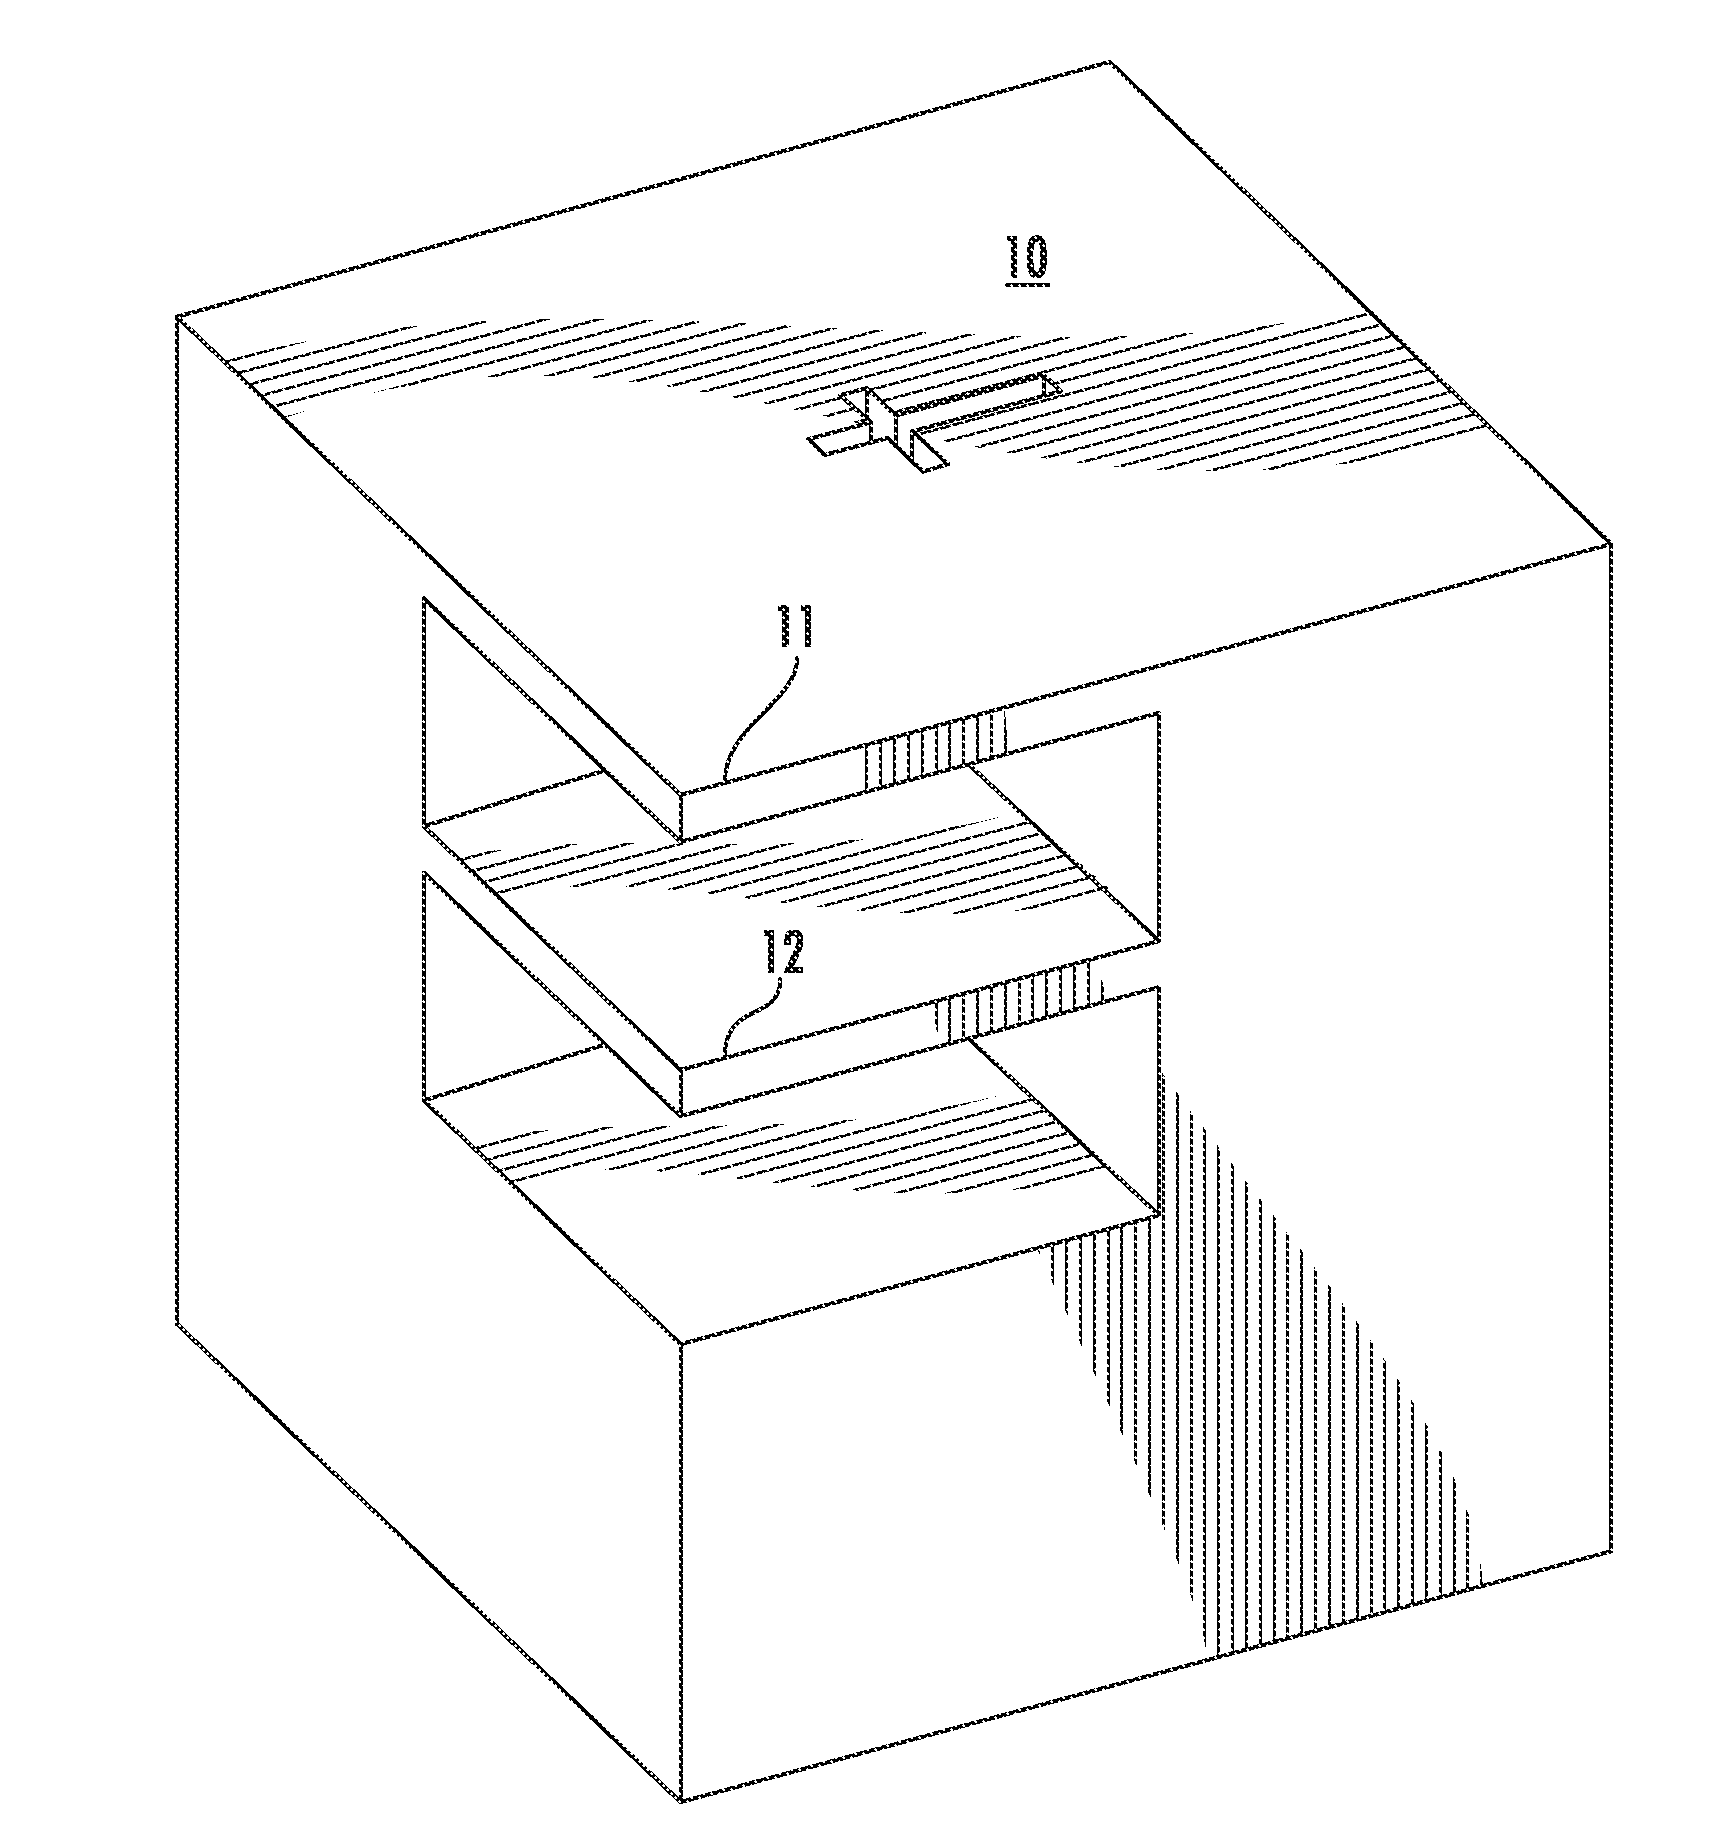 Systems and Methods for Designing And Fabricating Contact-Free Support Structures for Overhang Geometries of Parts in Powder-Bed Metal Additive Manufacturing